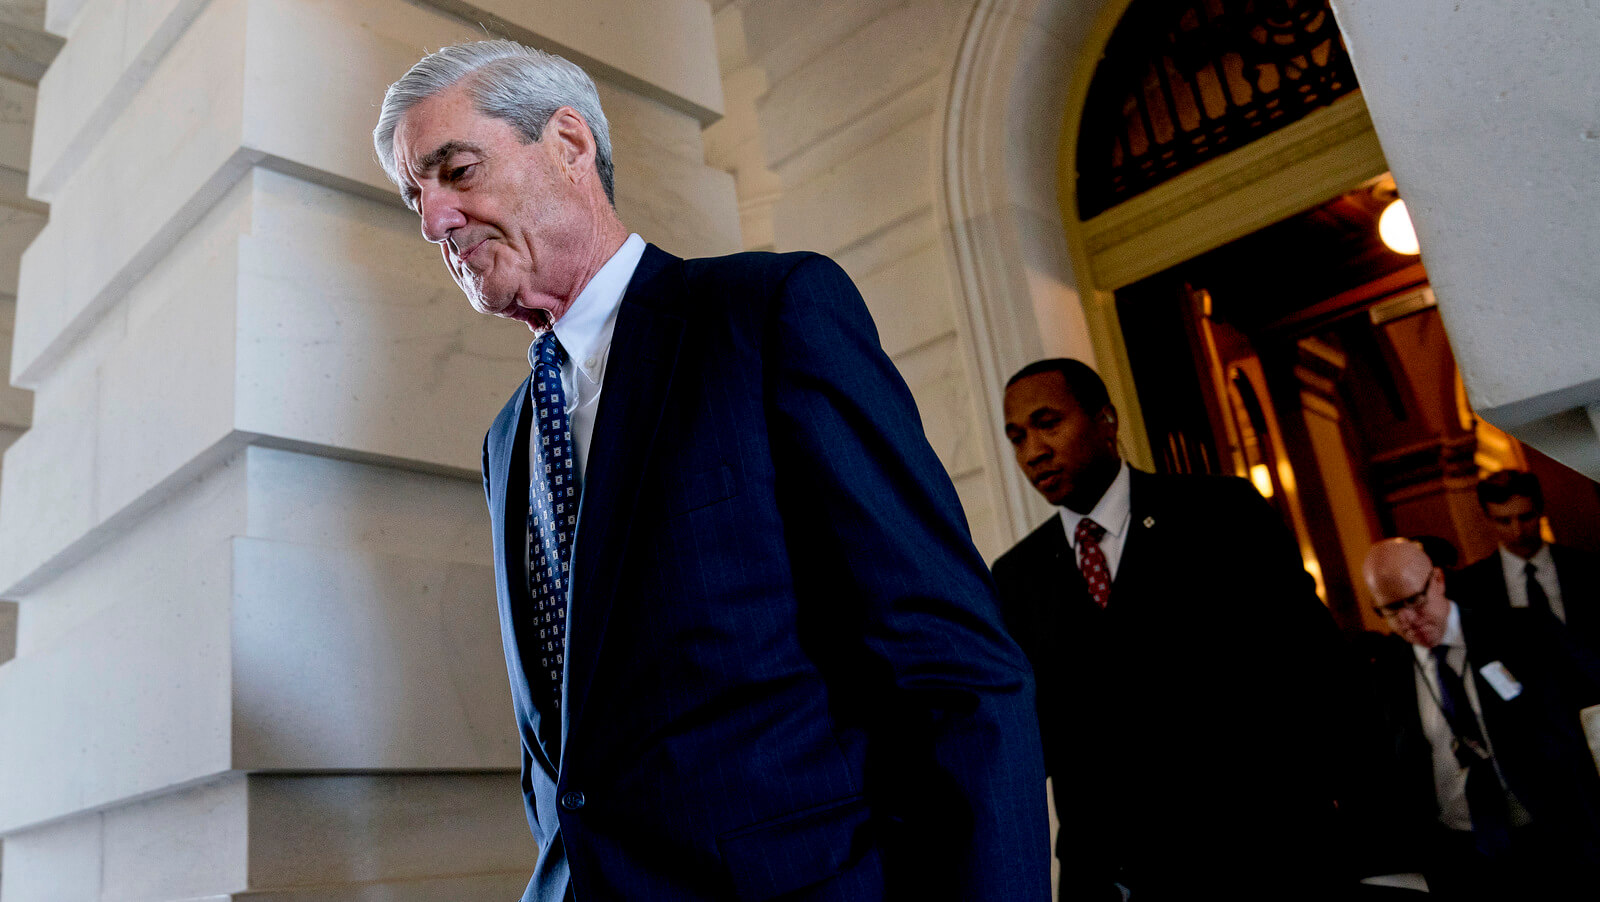 Robert Mueller, special counsel probing Russian interference in the 2016 election, departs Capitol Hill following a closed door meeting in Washington. Andrew Harnik | AP